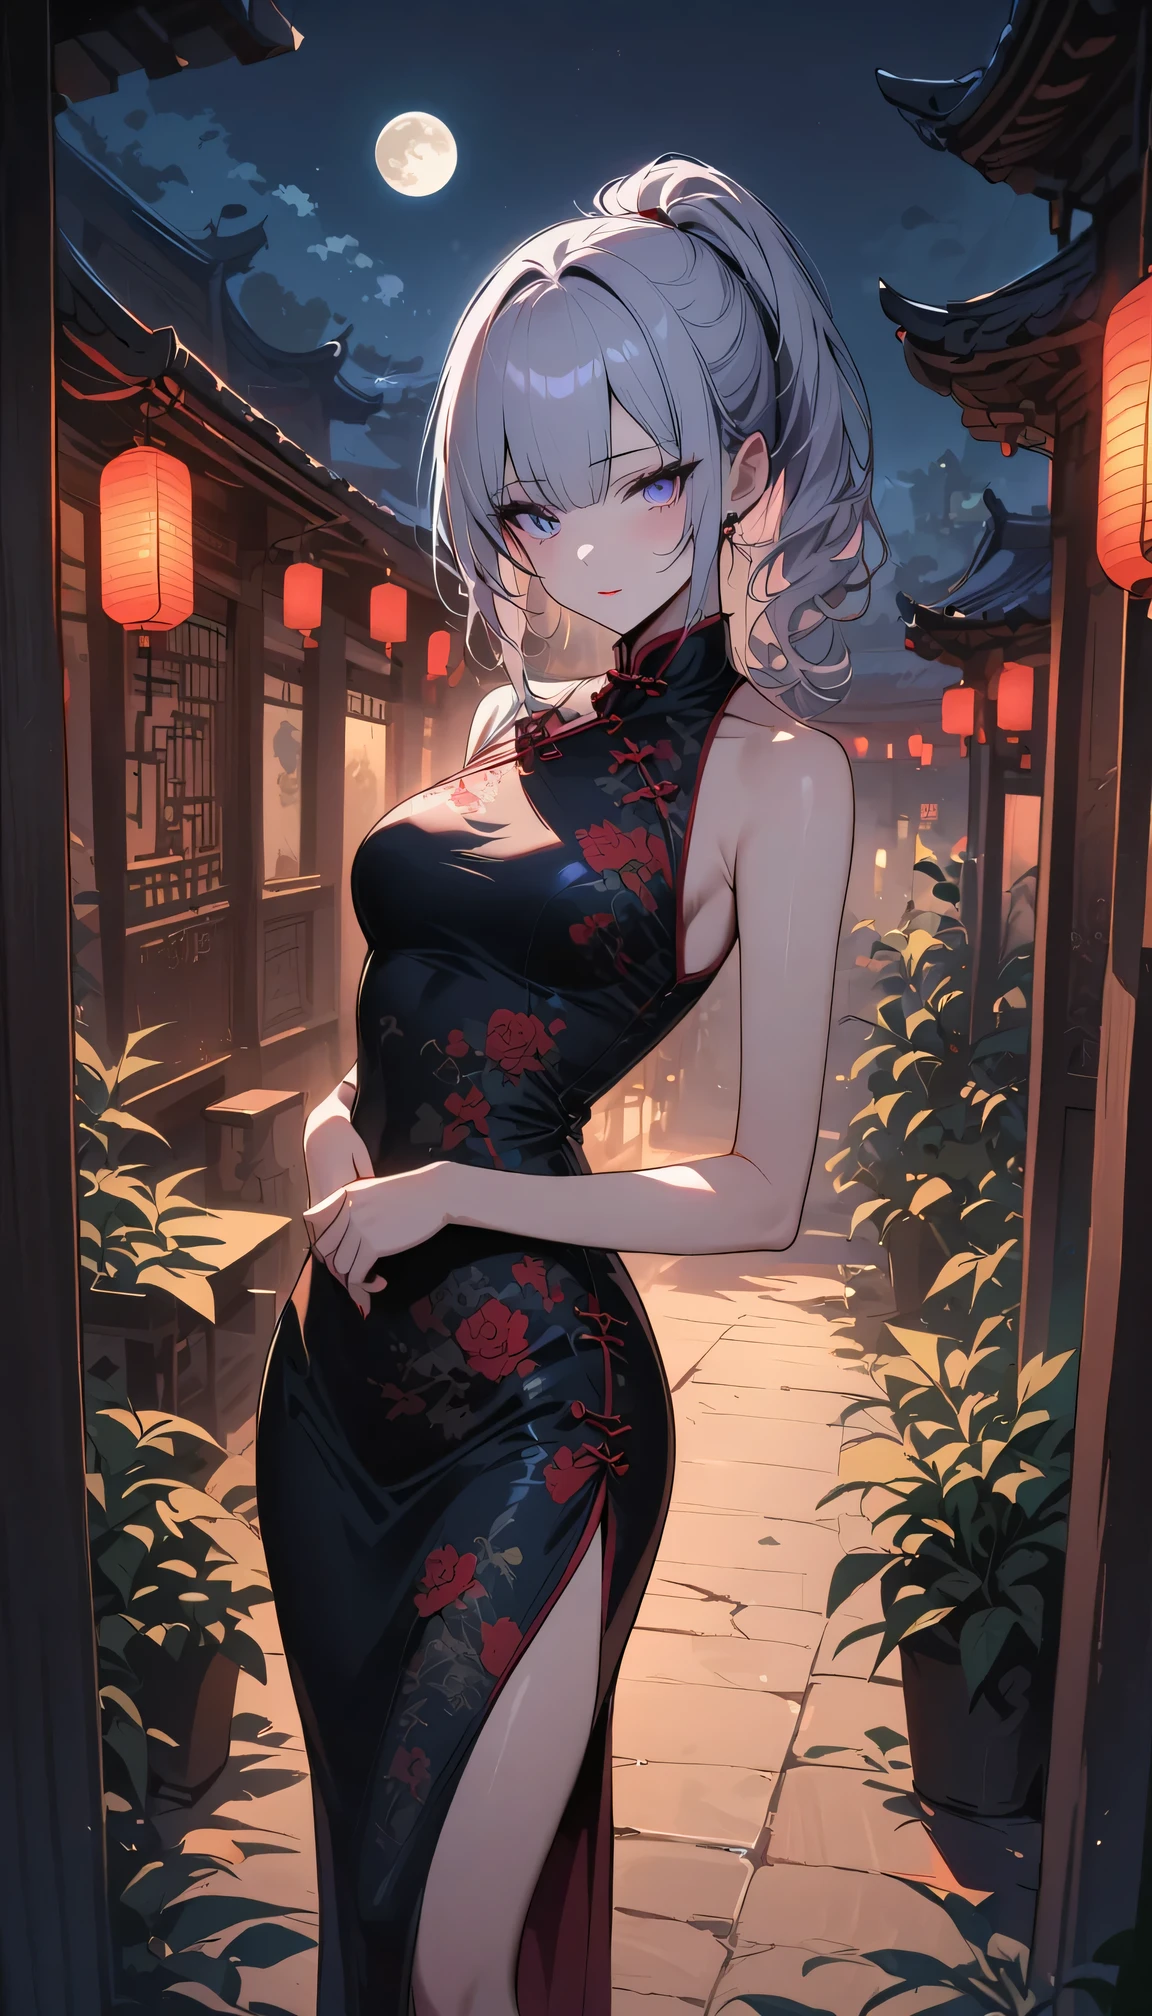 masterpiece, the best, night, full moon, 1 adult woman, Chinese Architecture, cheongsam, China costume, Royal sister, cold face, Poker face, woman with long silver hair, light pink lips, , calm, intellectuals, Three bangs, gray pupil,  street view, facial details,